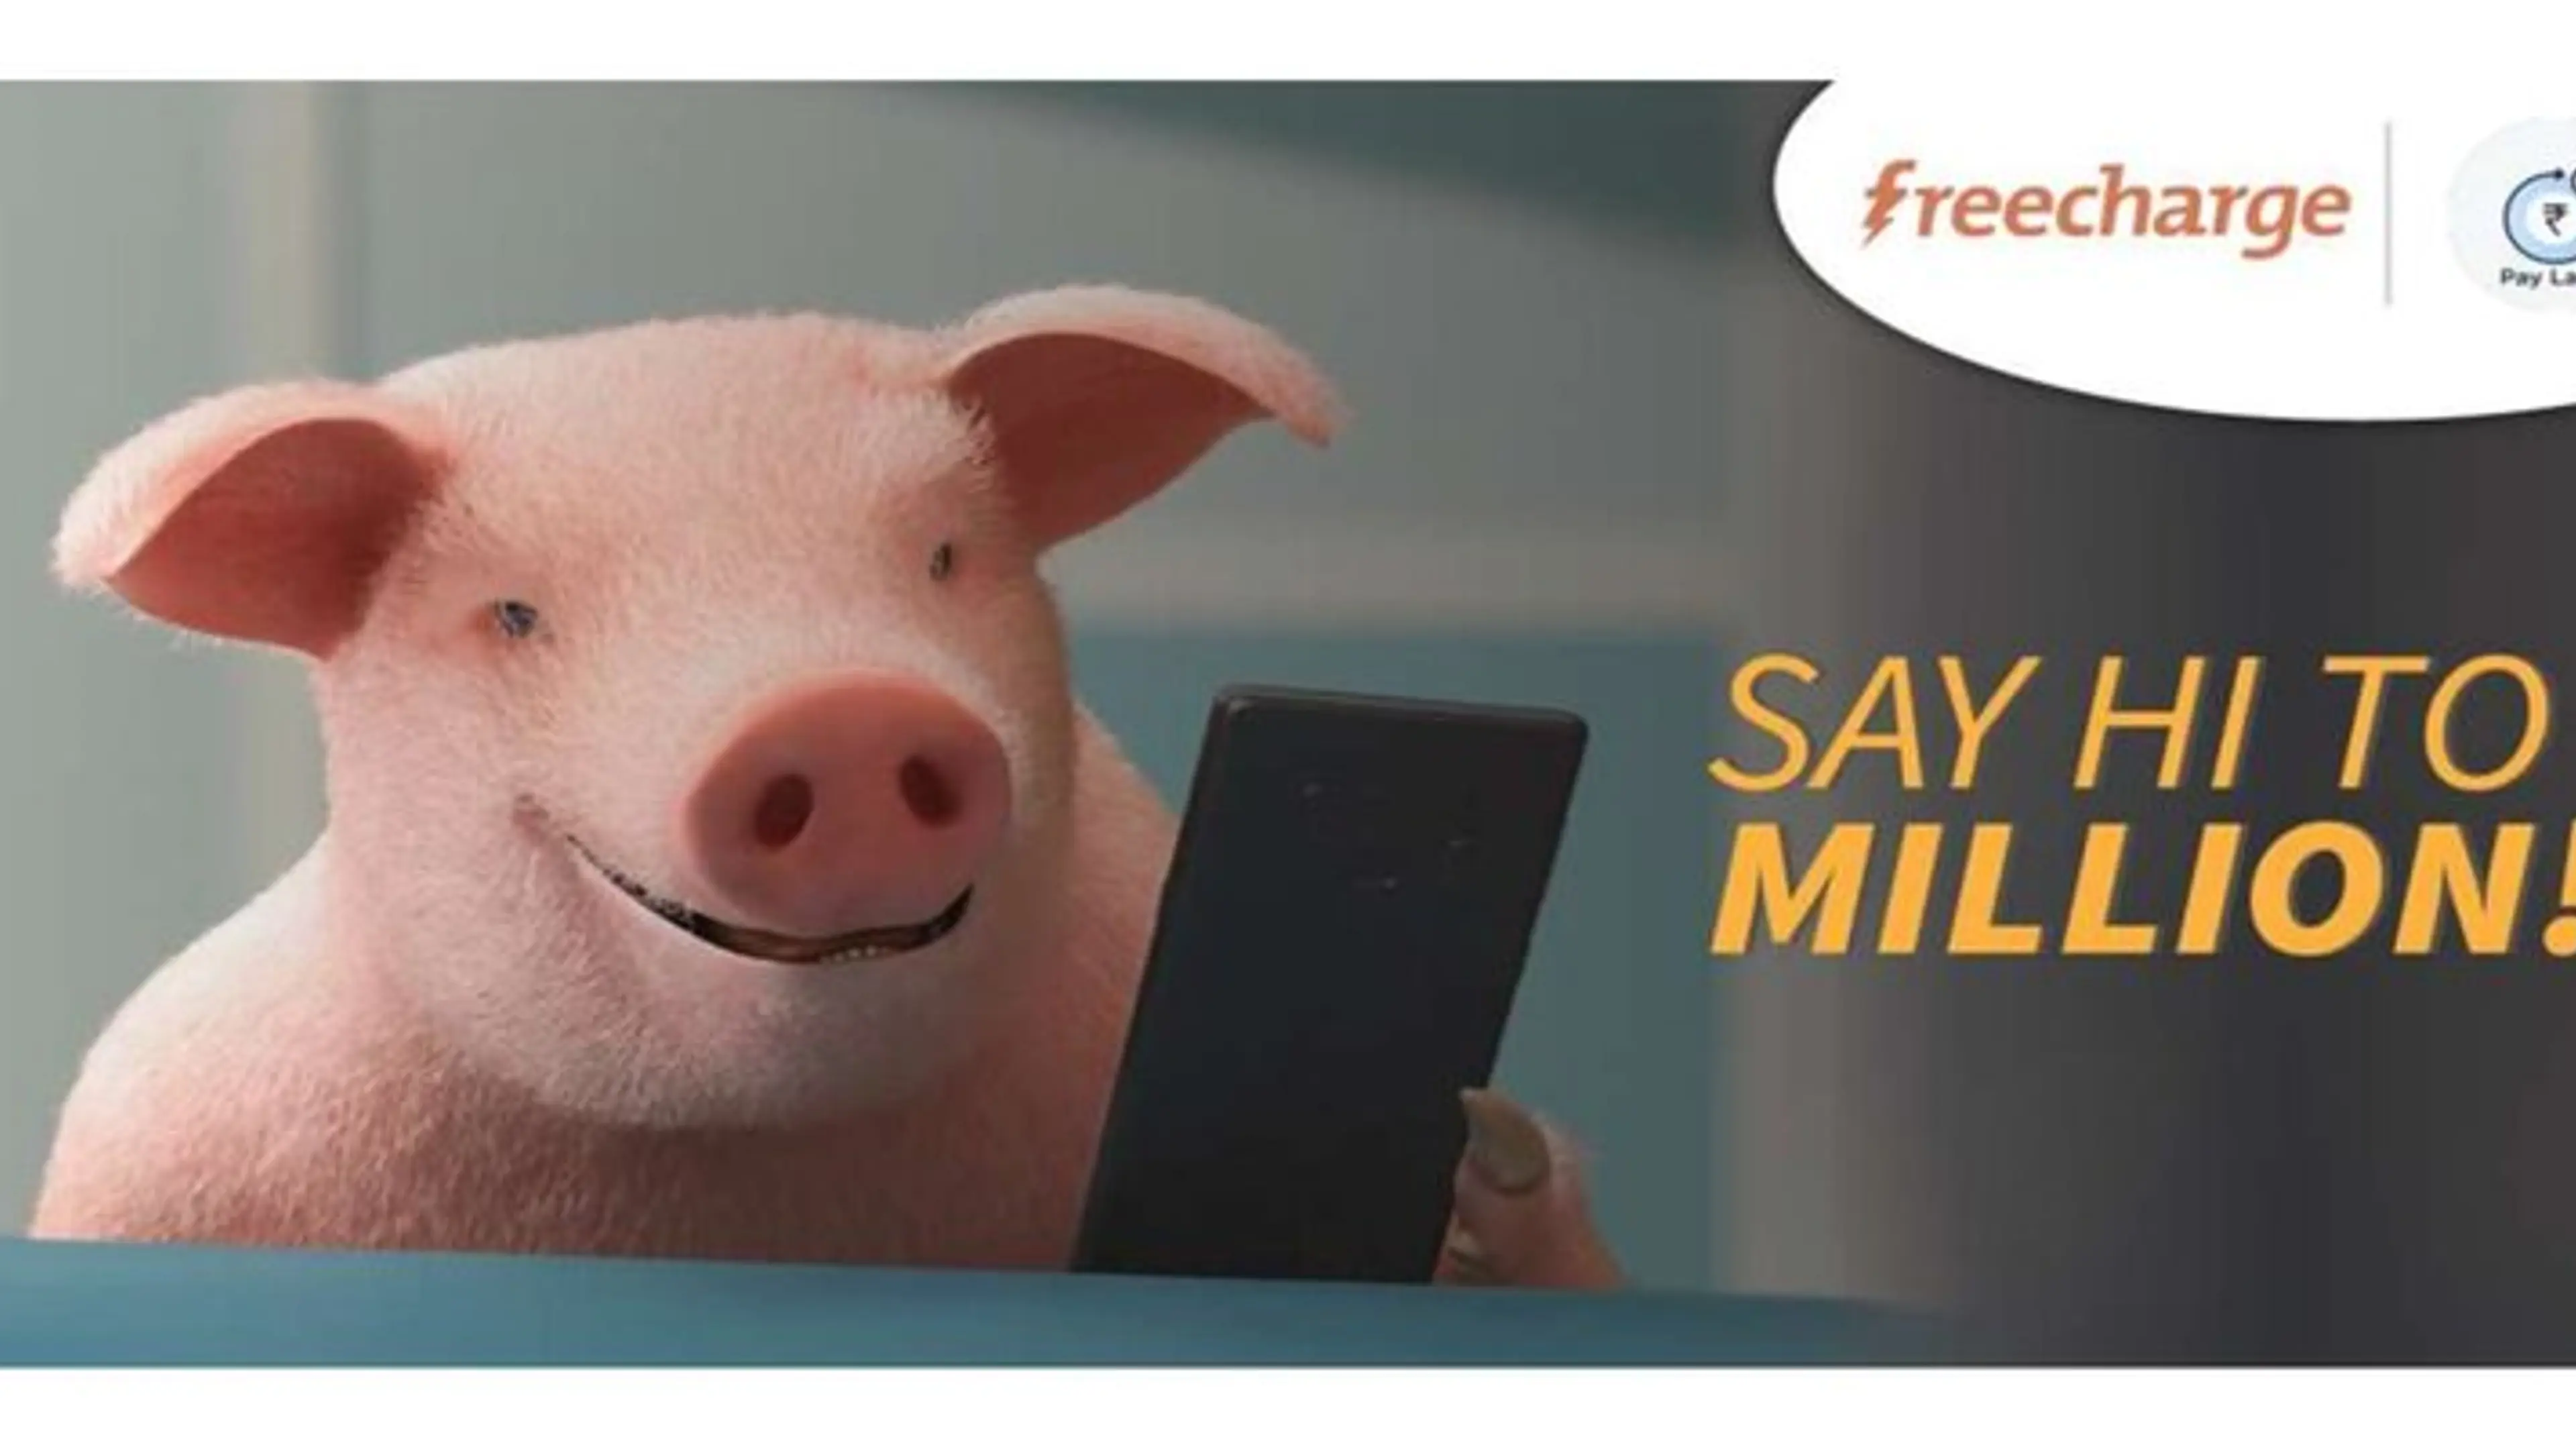 With its new offering ‘Pay Later’, Freecharge is focused on being the go-to line of credit for millennials